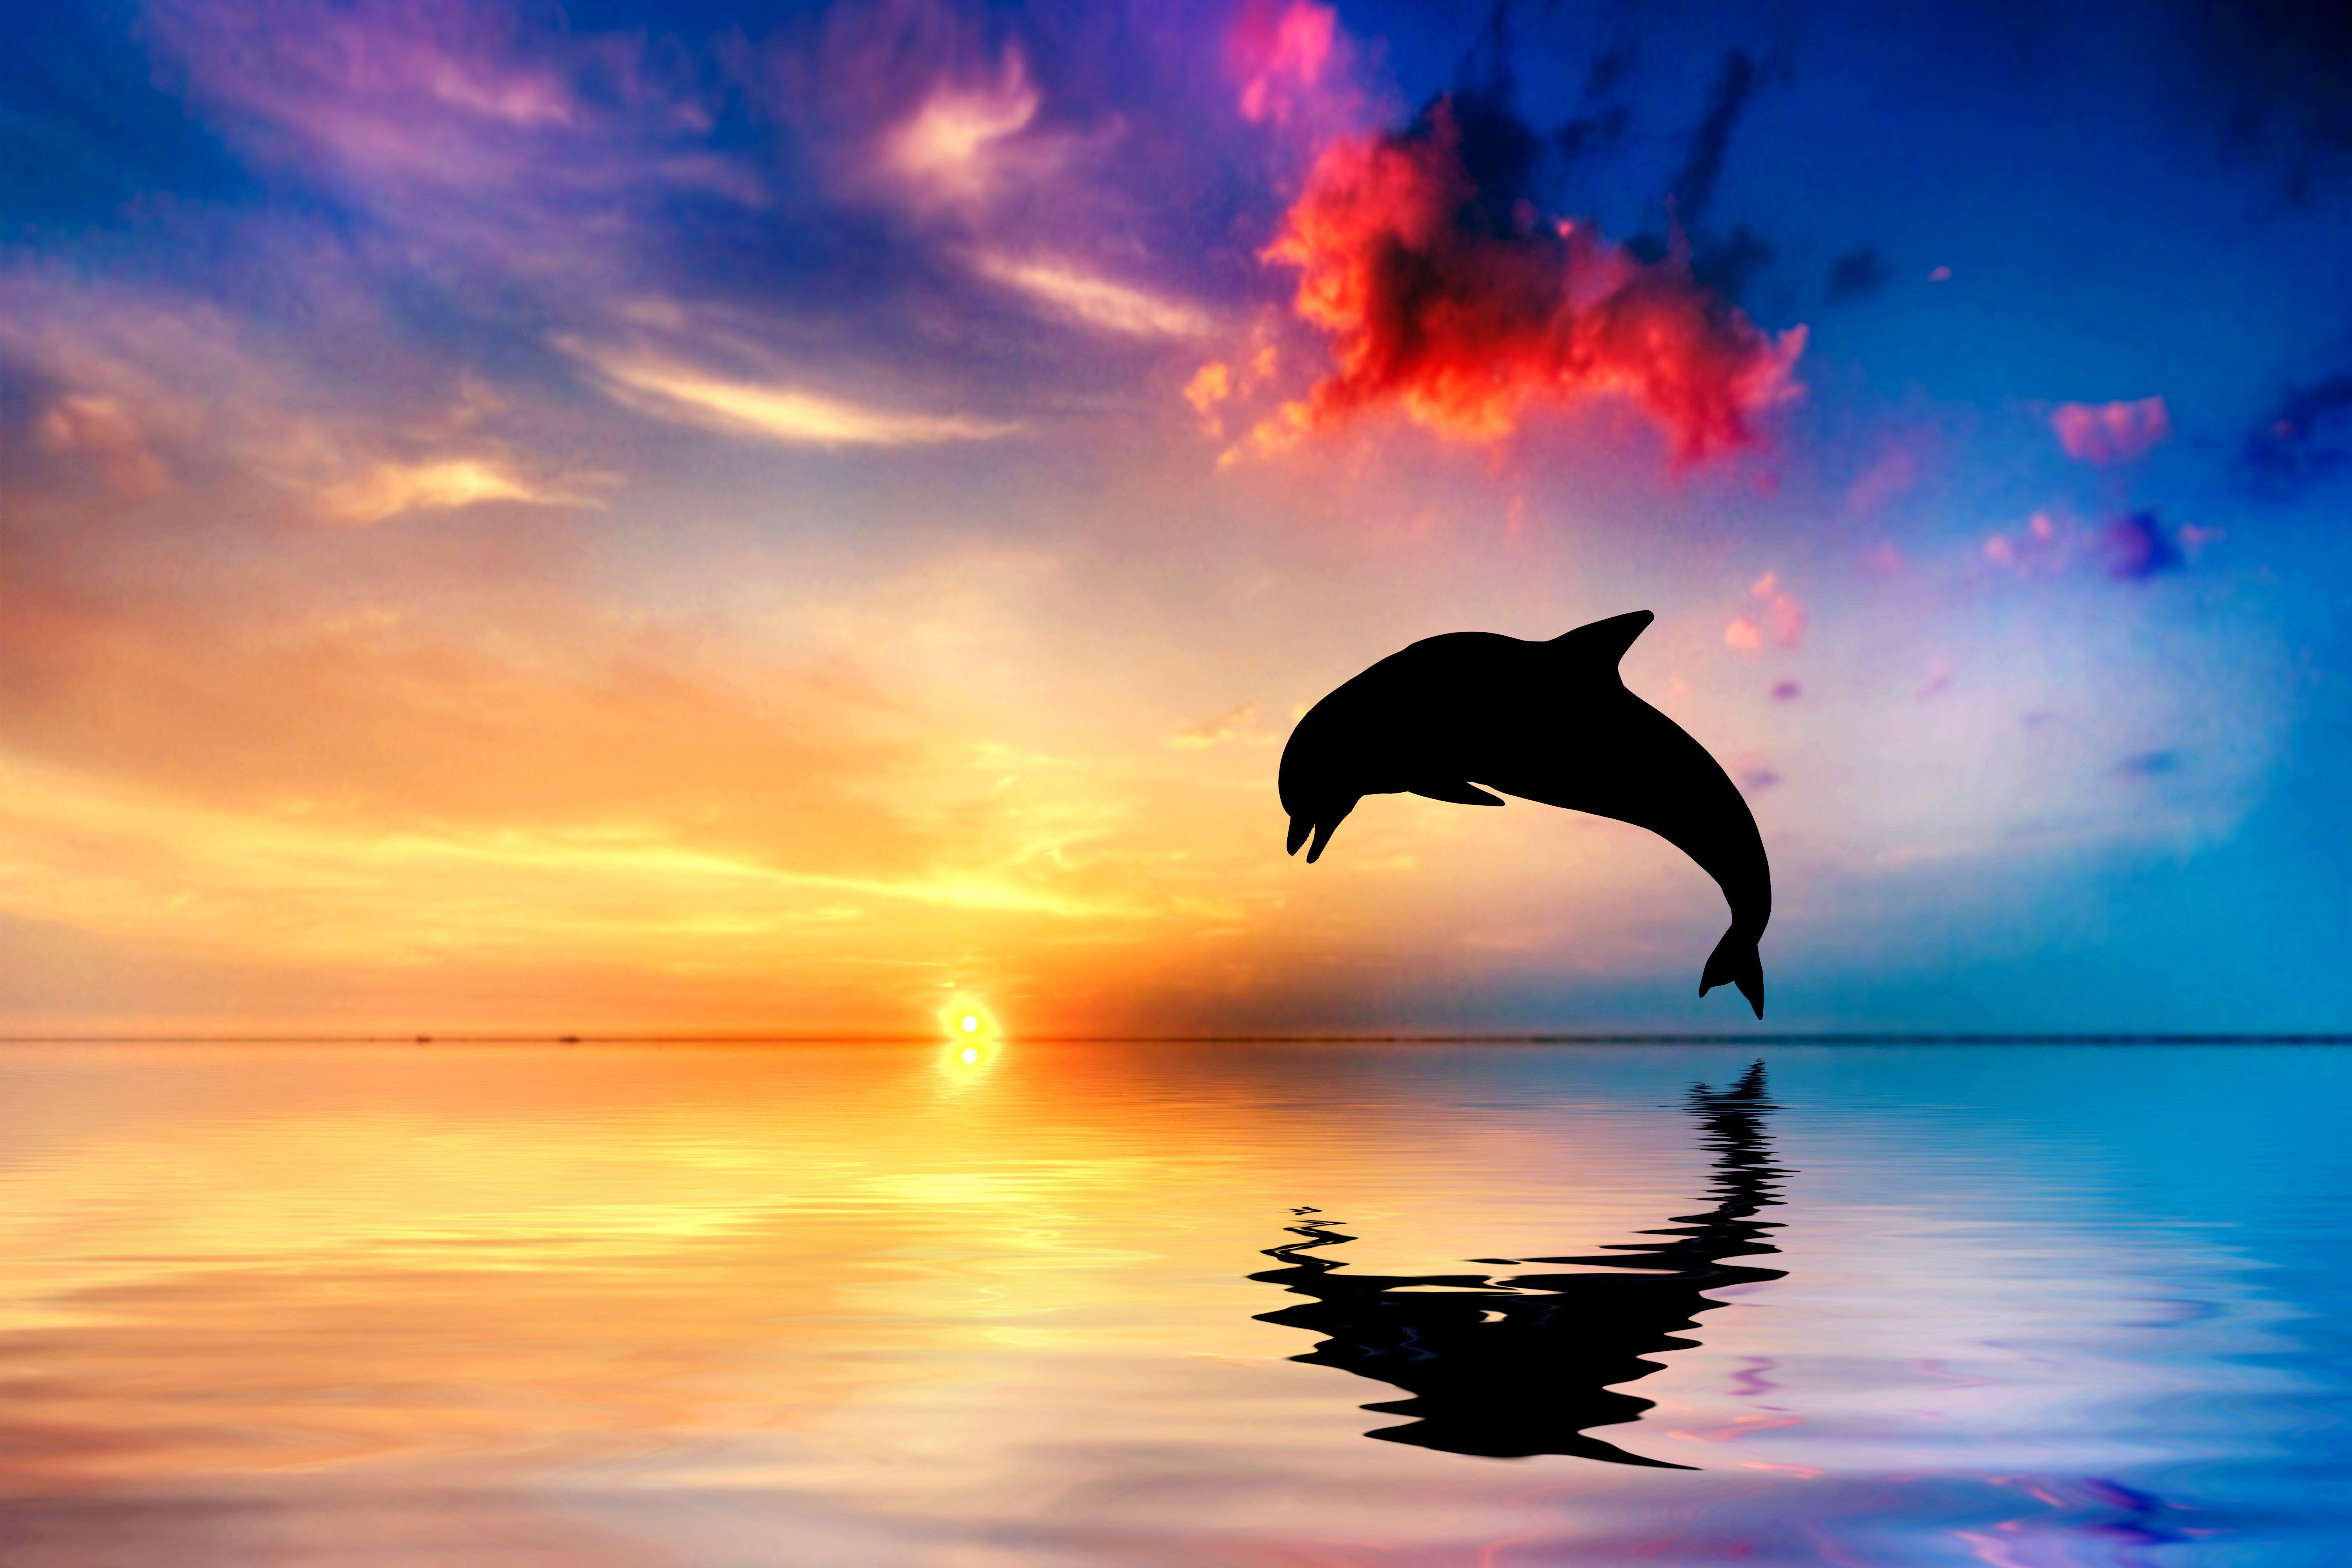 Dolphins Most Beautiful Sunset Wallpaper